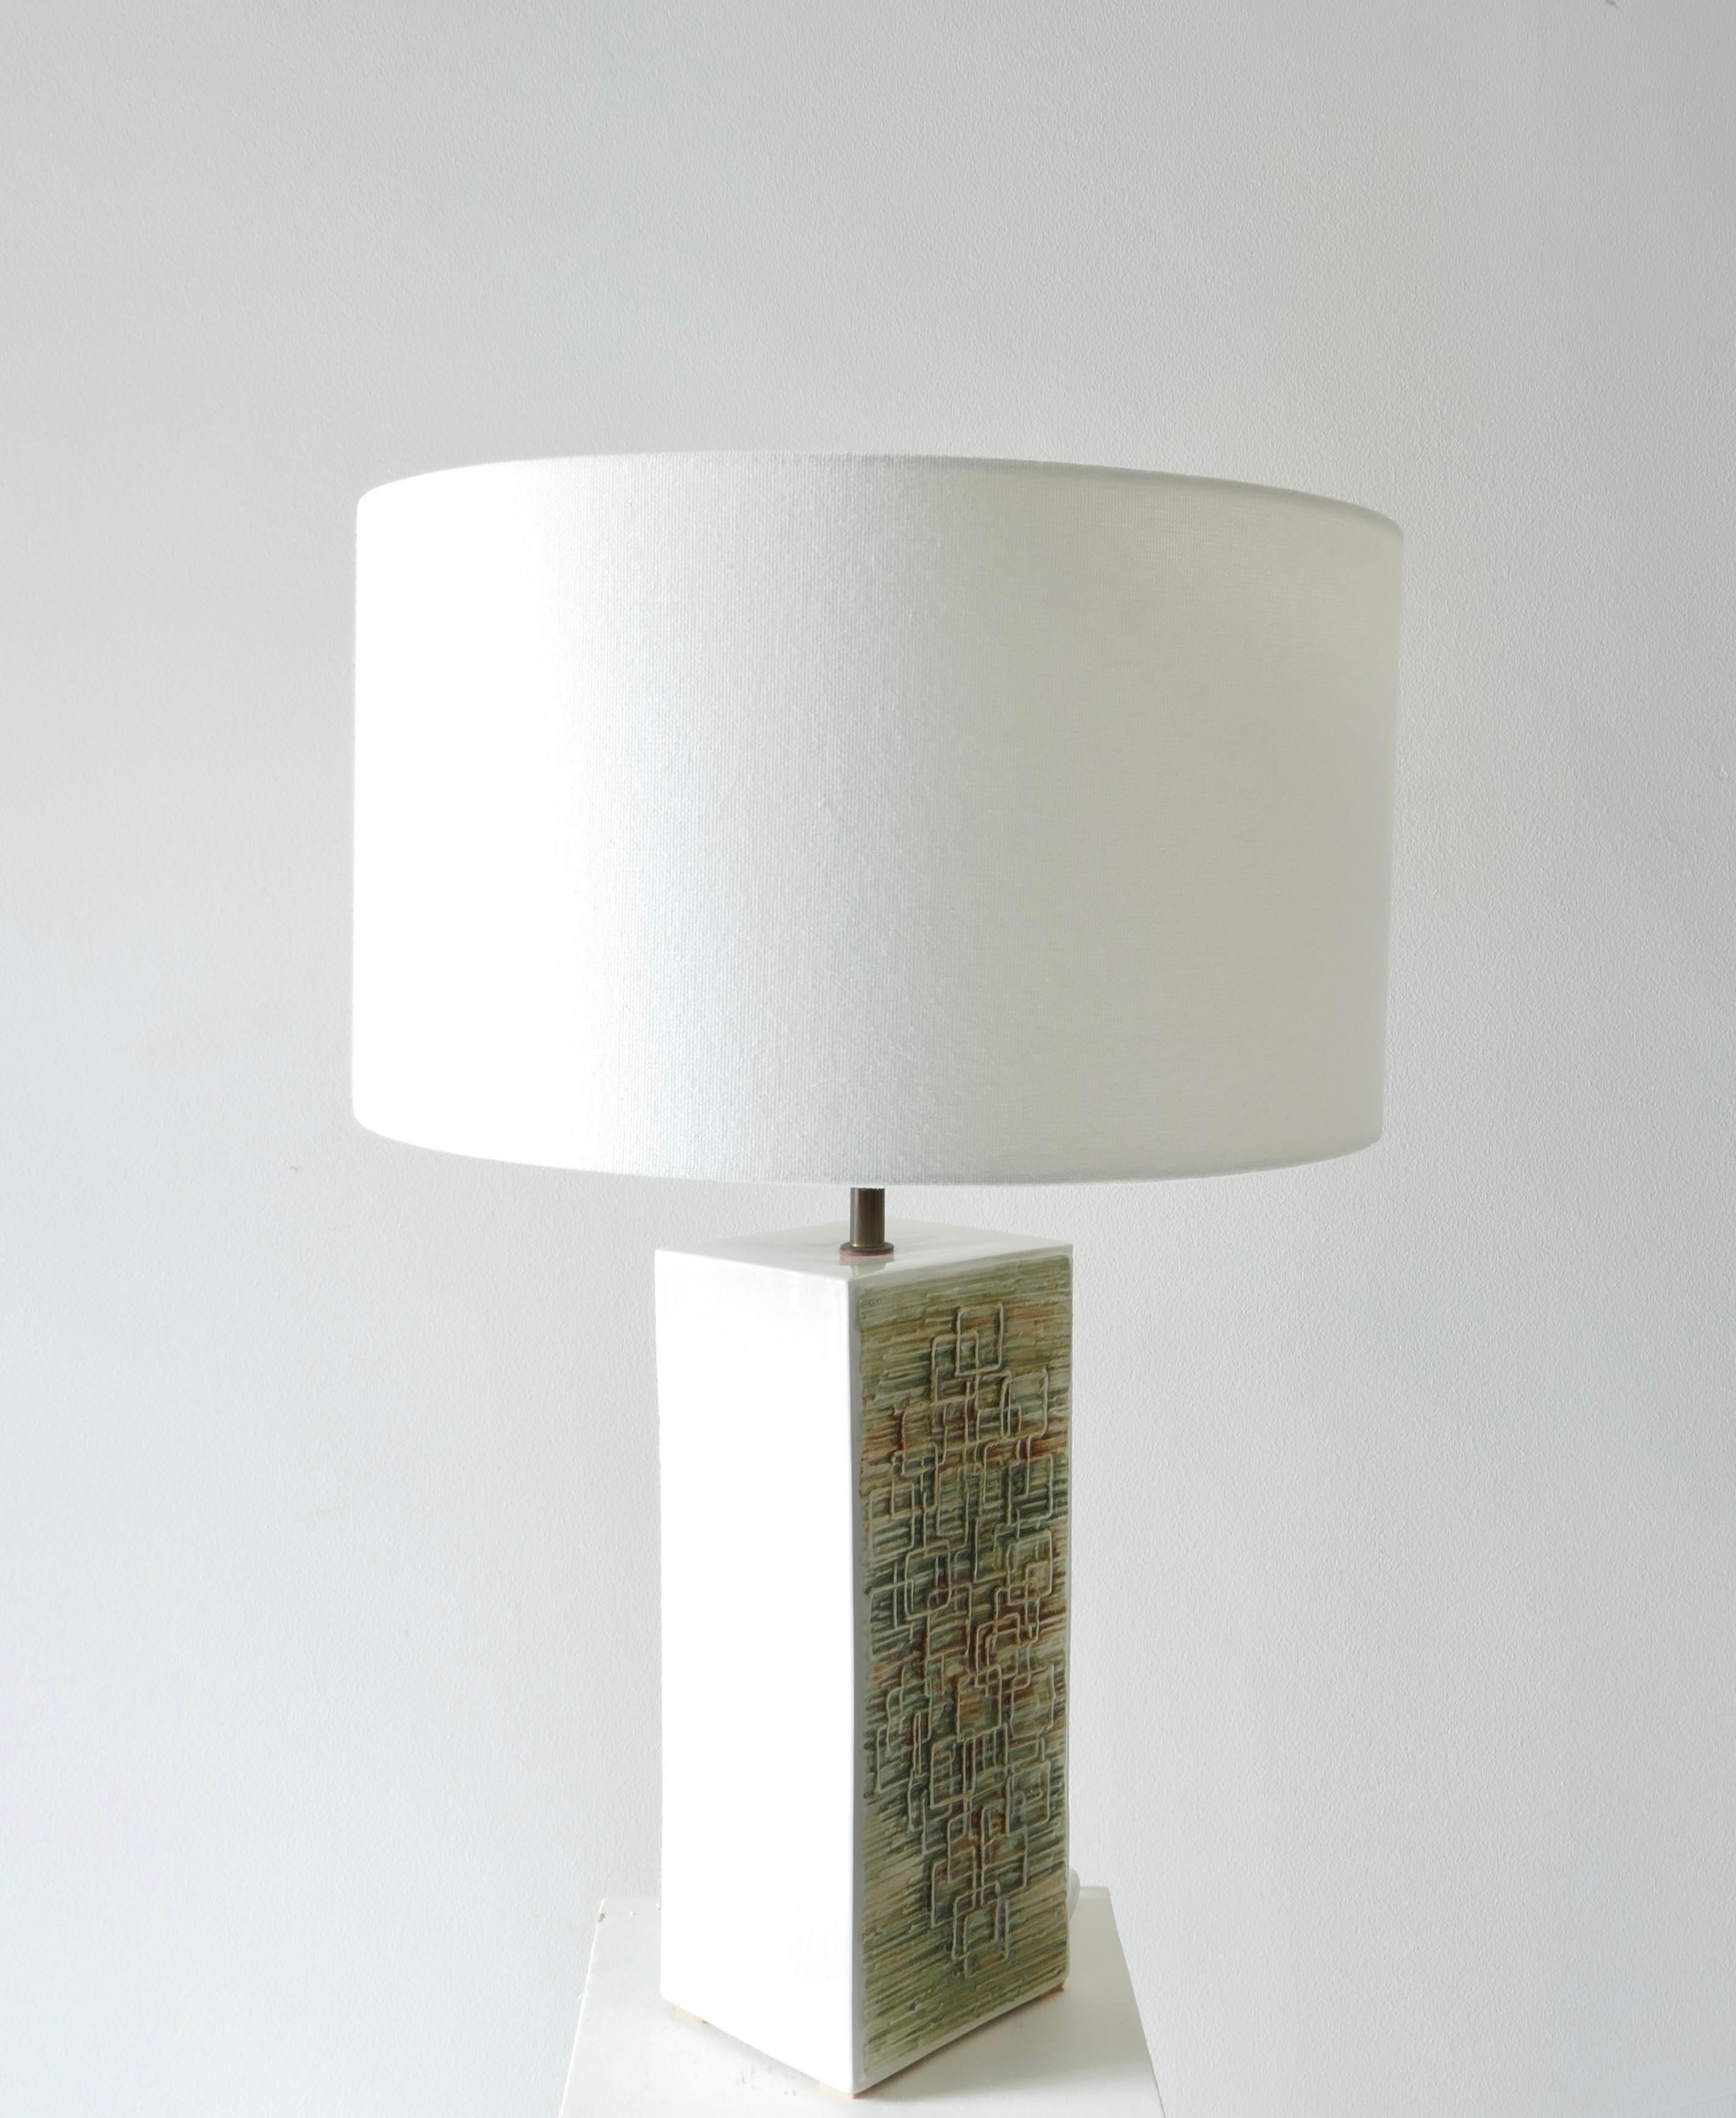 Green Tone Ceramic Table Lamp, 1960s For Sale 1